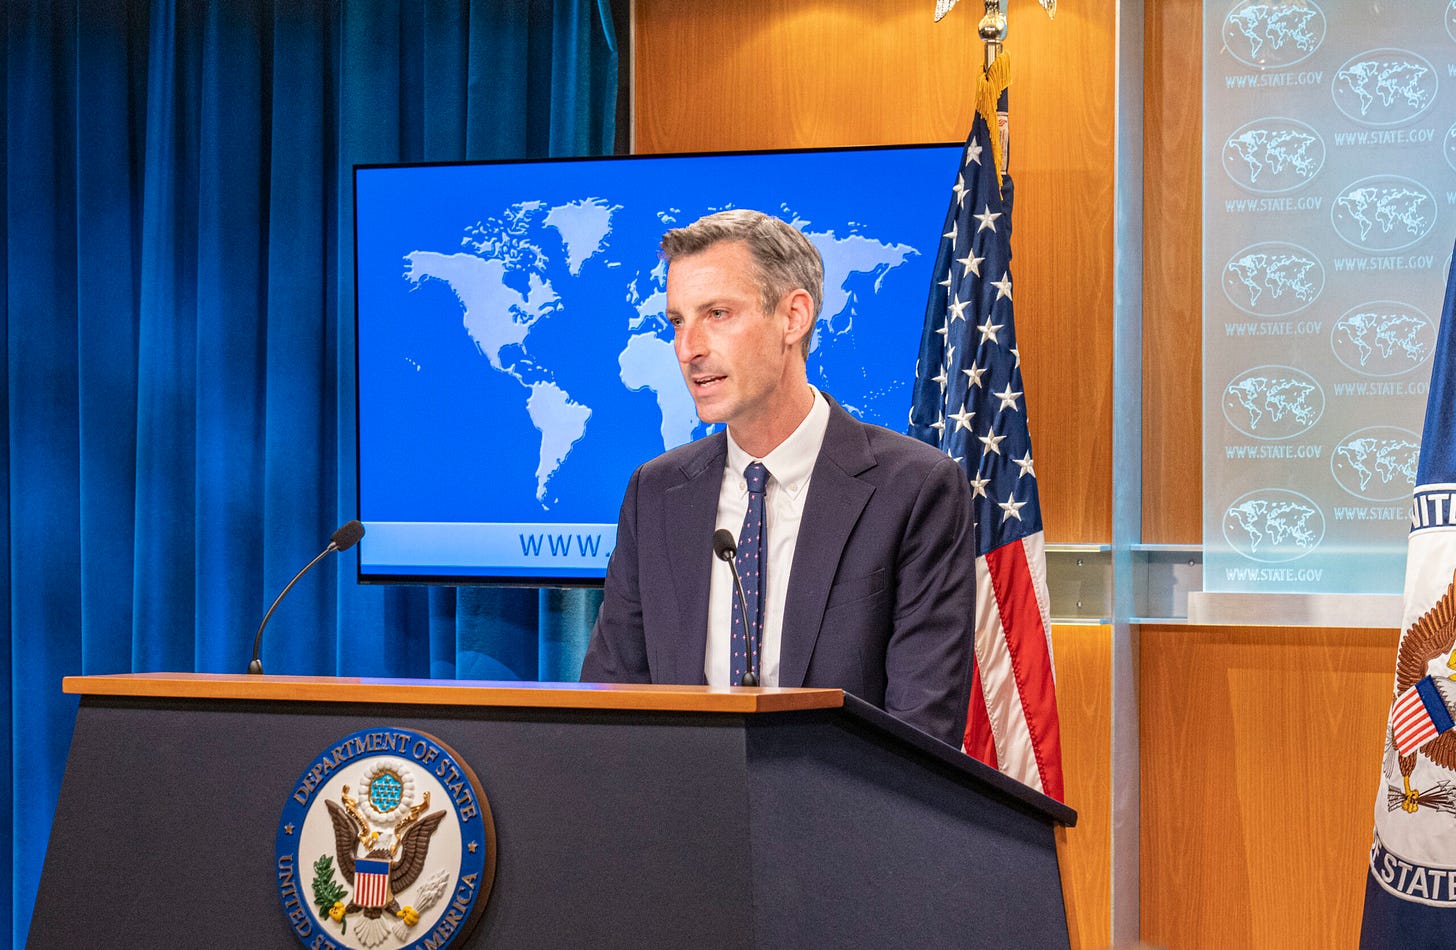 Statement by Department of State Spokesperson Ned Price calling for the  Immediate Release of Aleksey Navalny - U.S. Embassy & Consulates in Russia